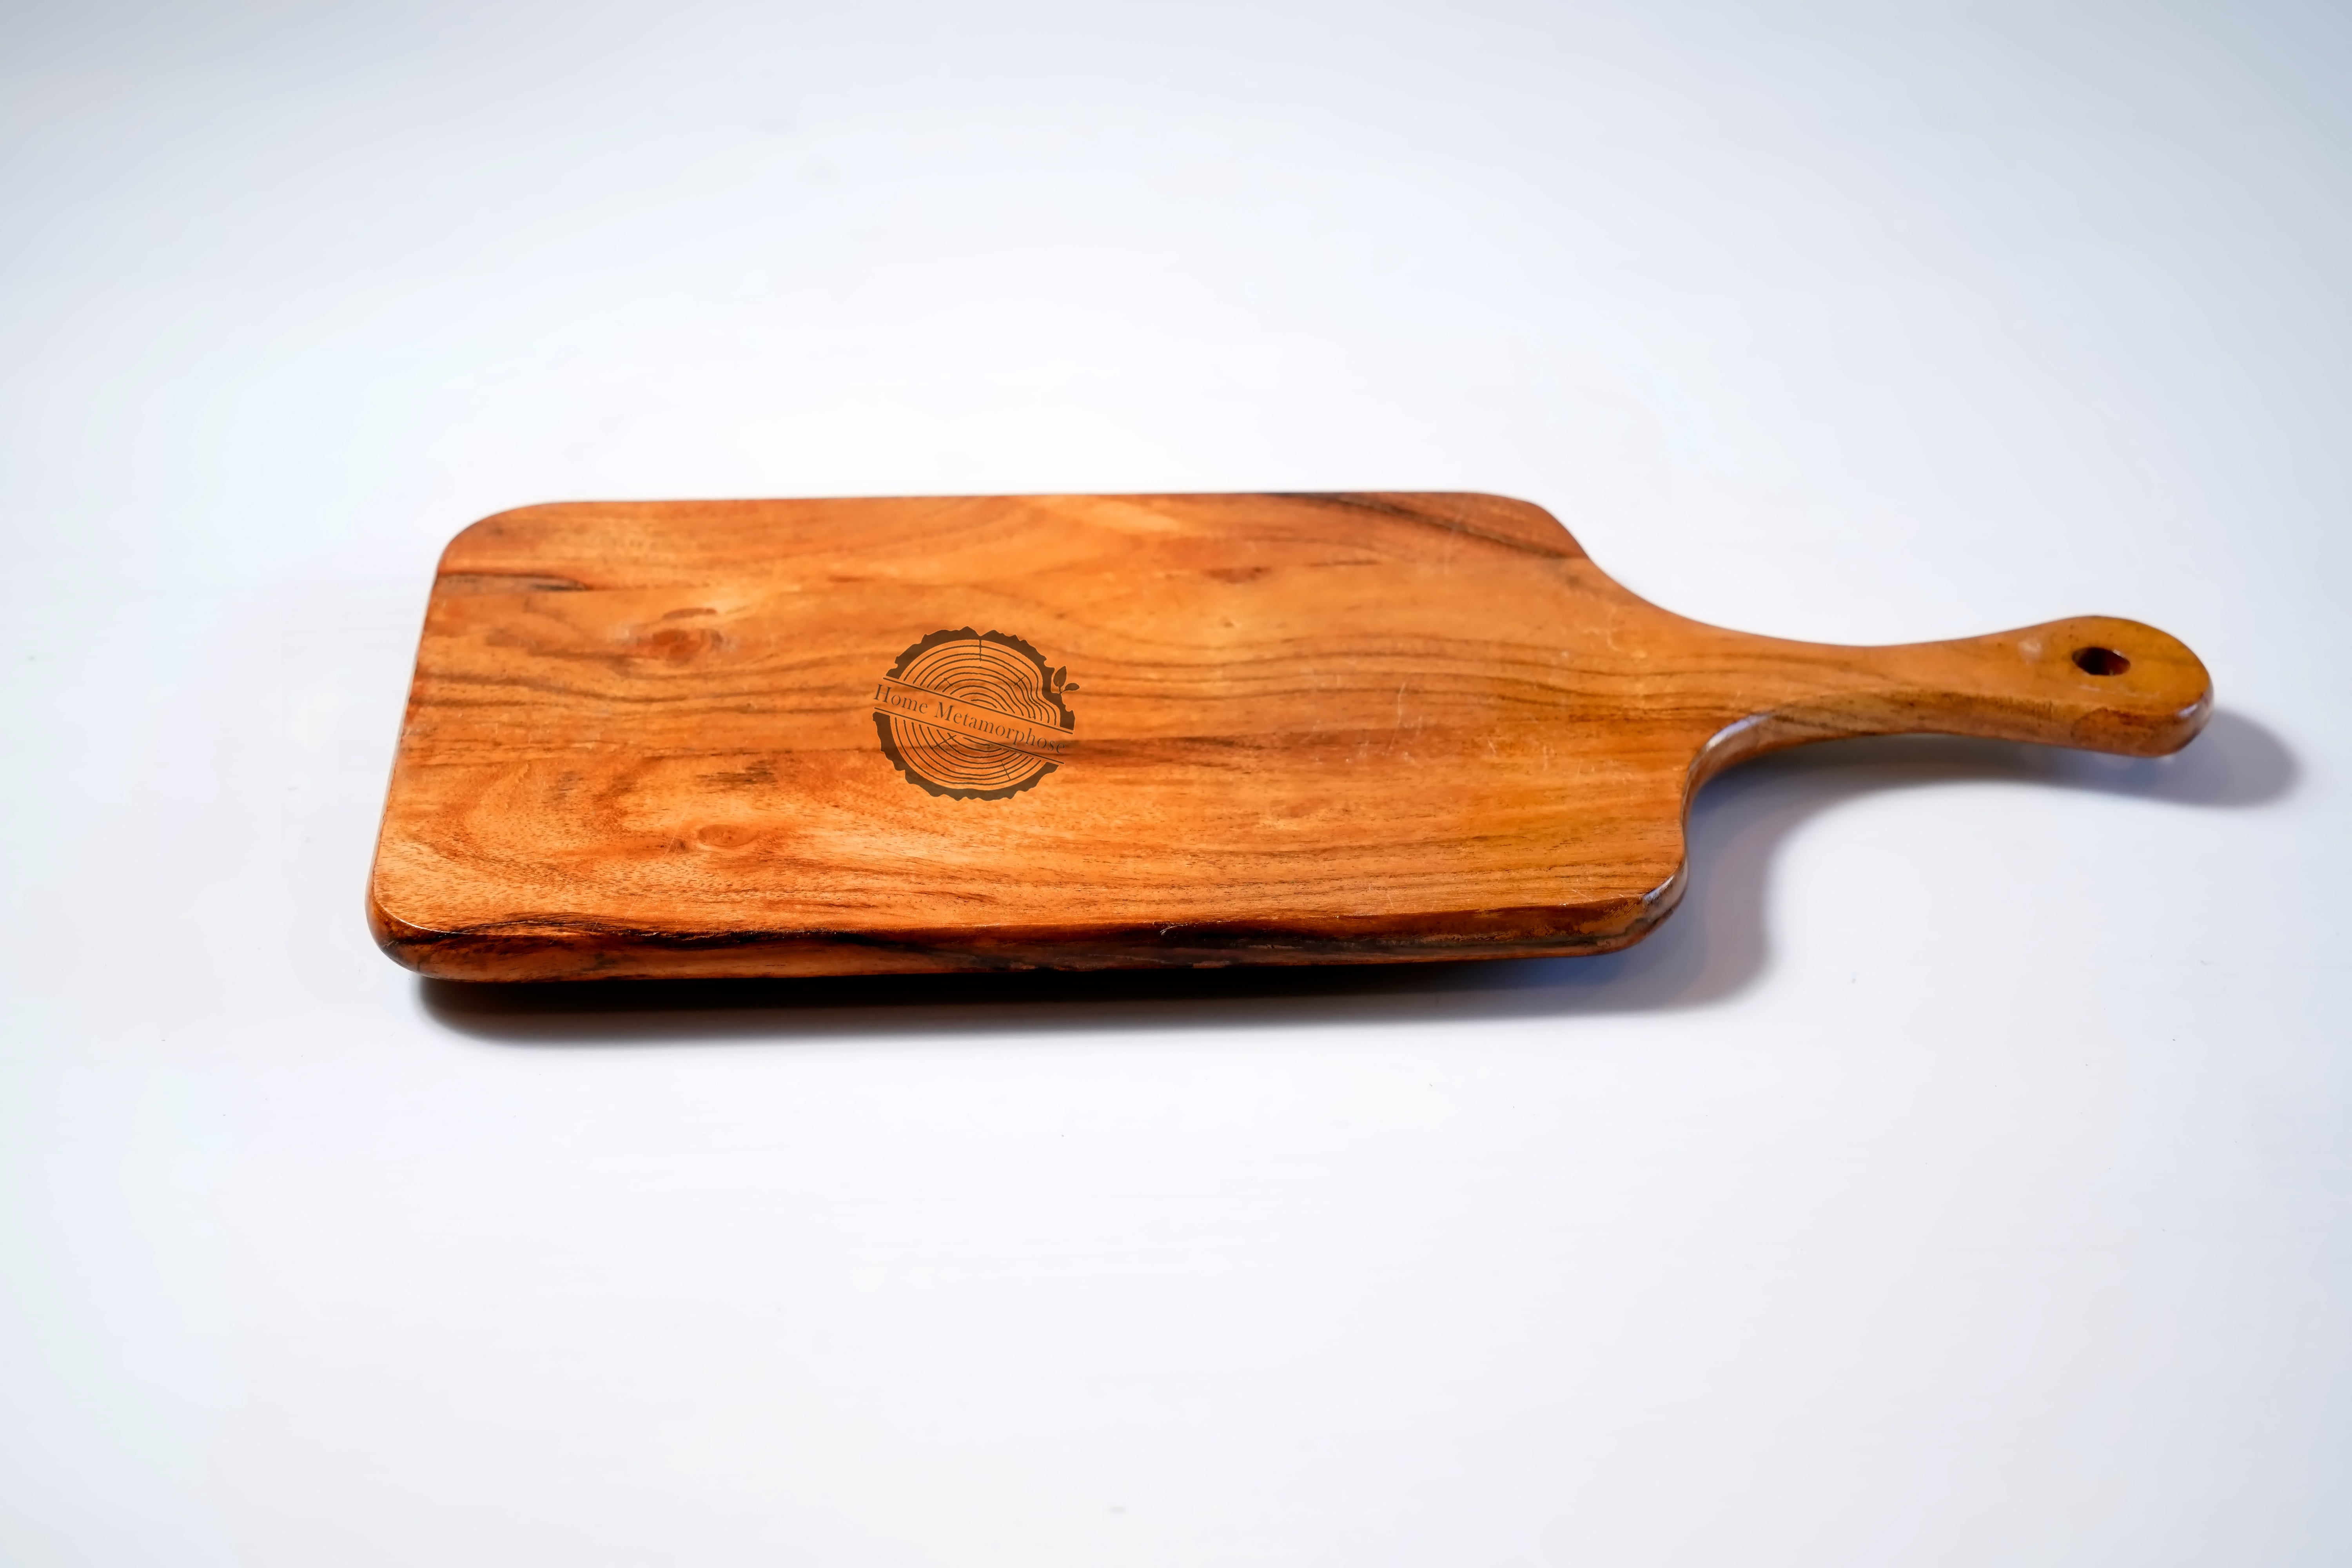 Mango Wooden Chopping Board For Superior Kitchen Performance, Cutting Board For Kitchen Mastery - Trusted By Home Chefs